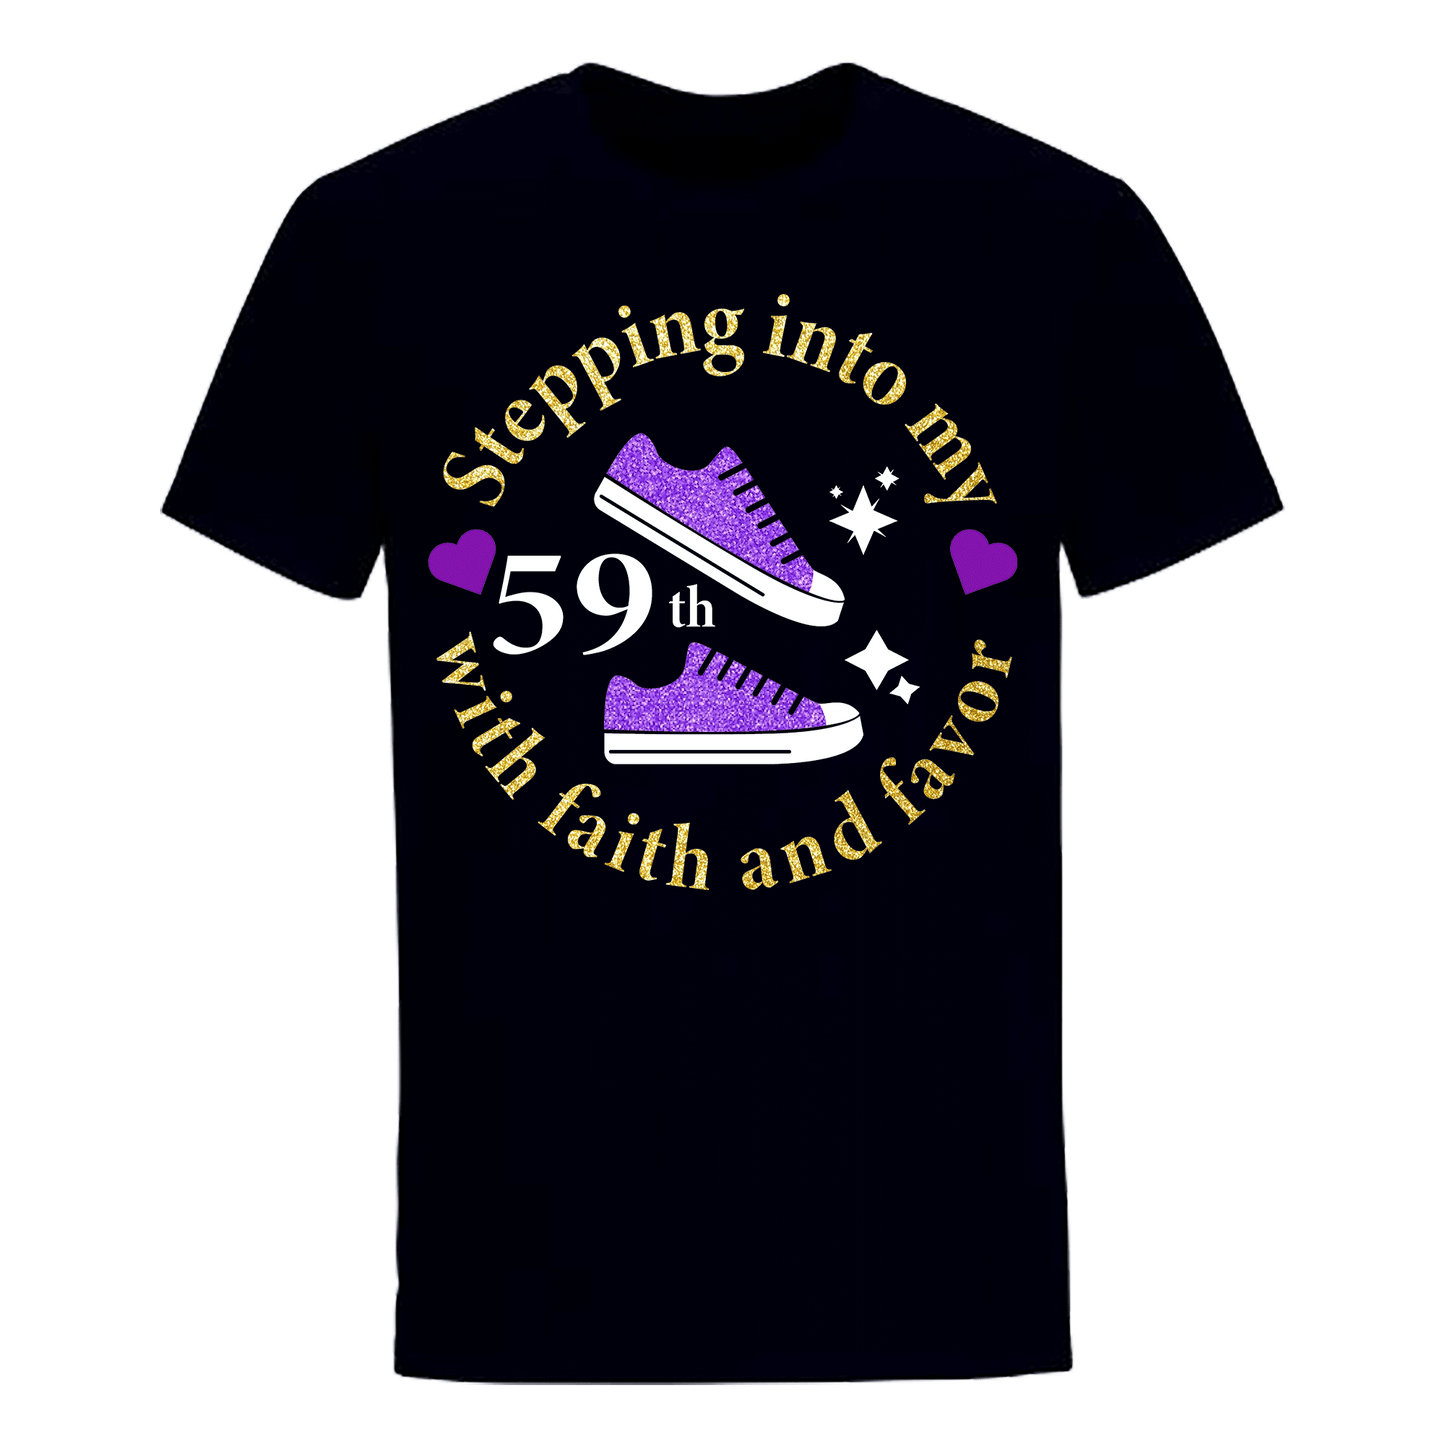 STEPPING INTO 59TH WITH FAITH & FAVOR UNISEX SHIRT